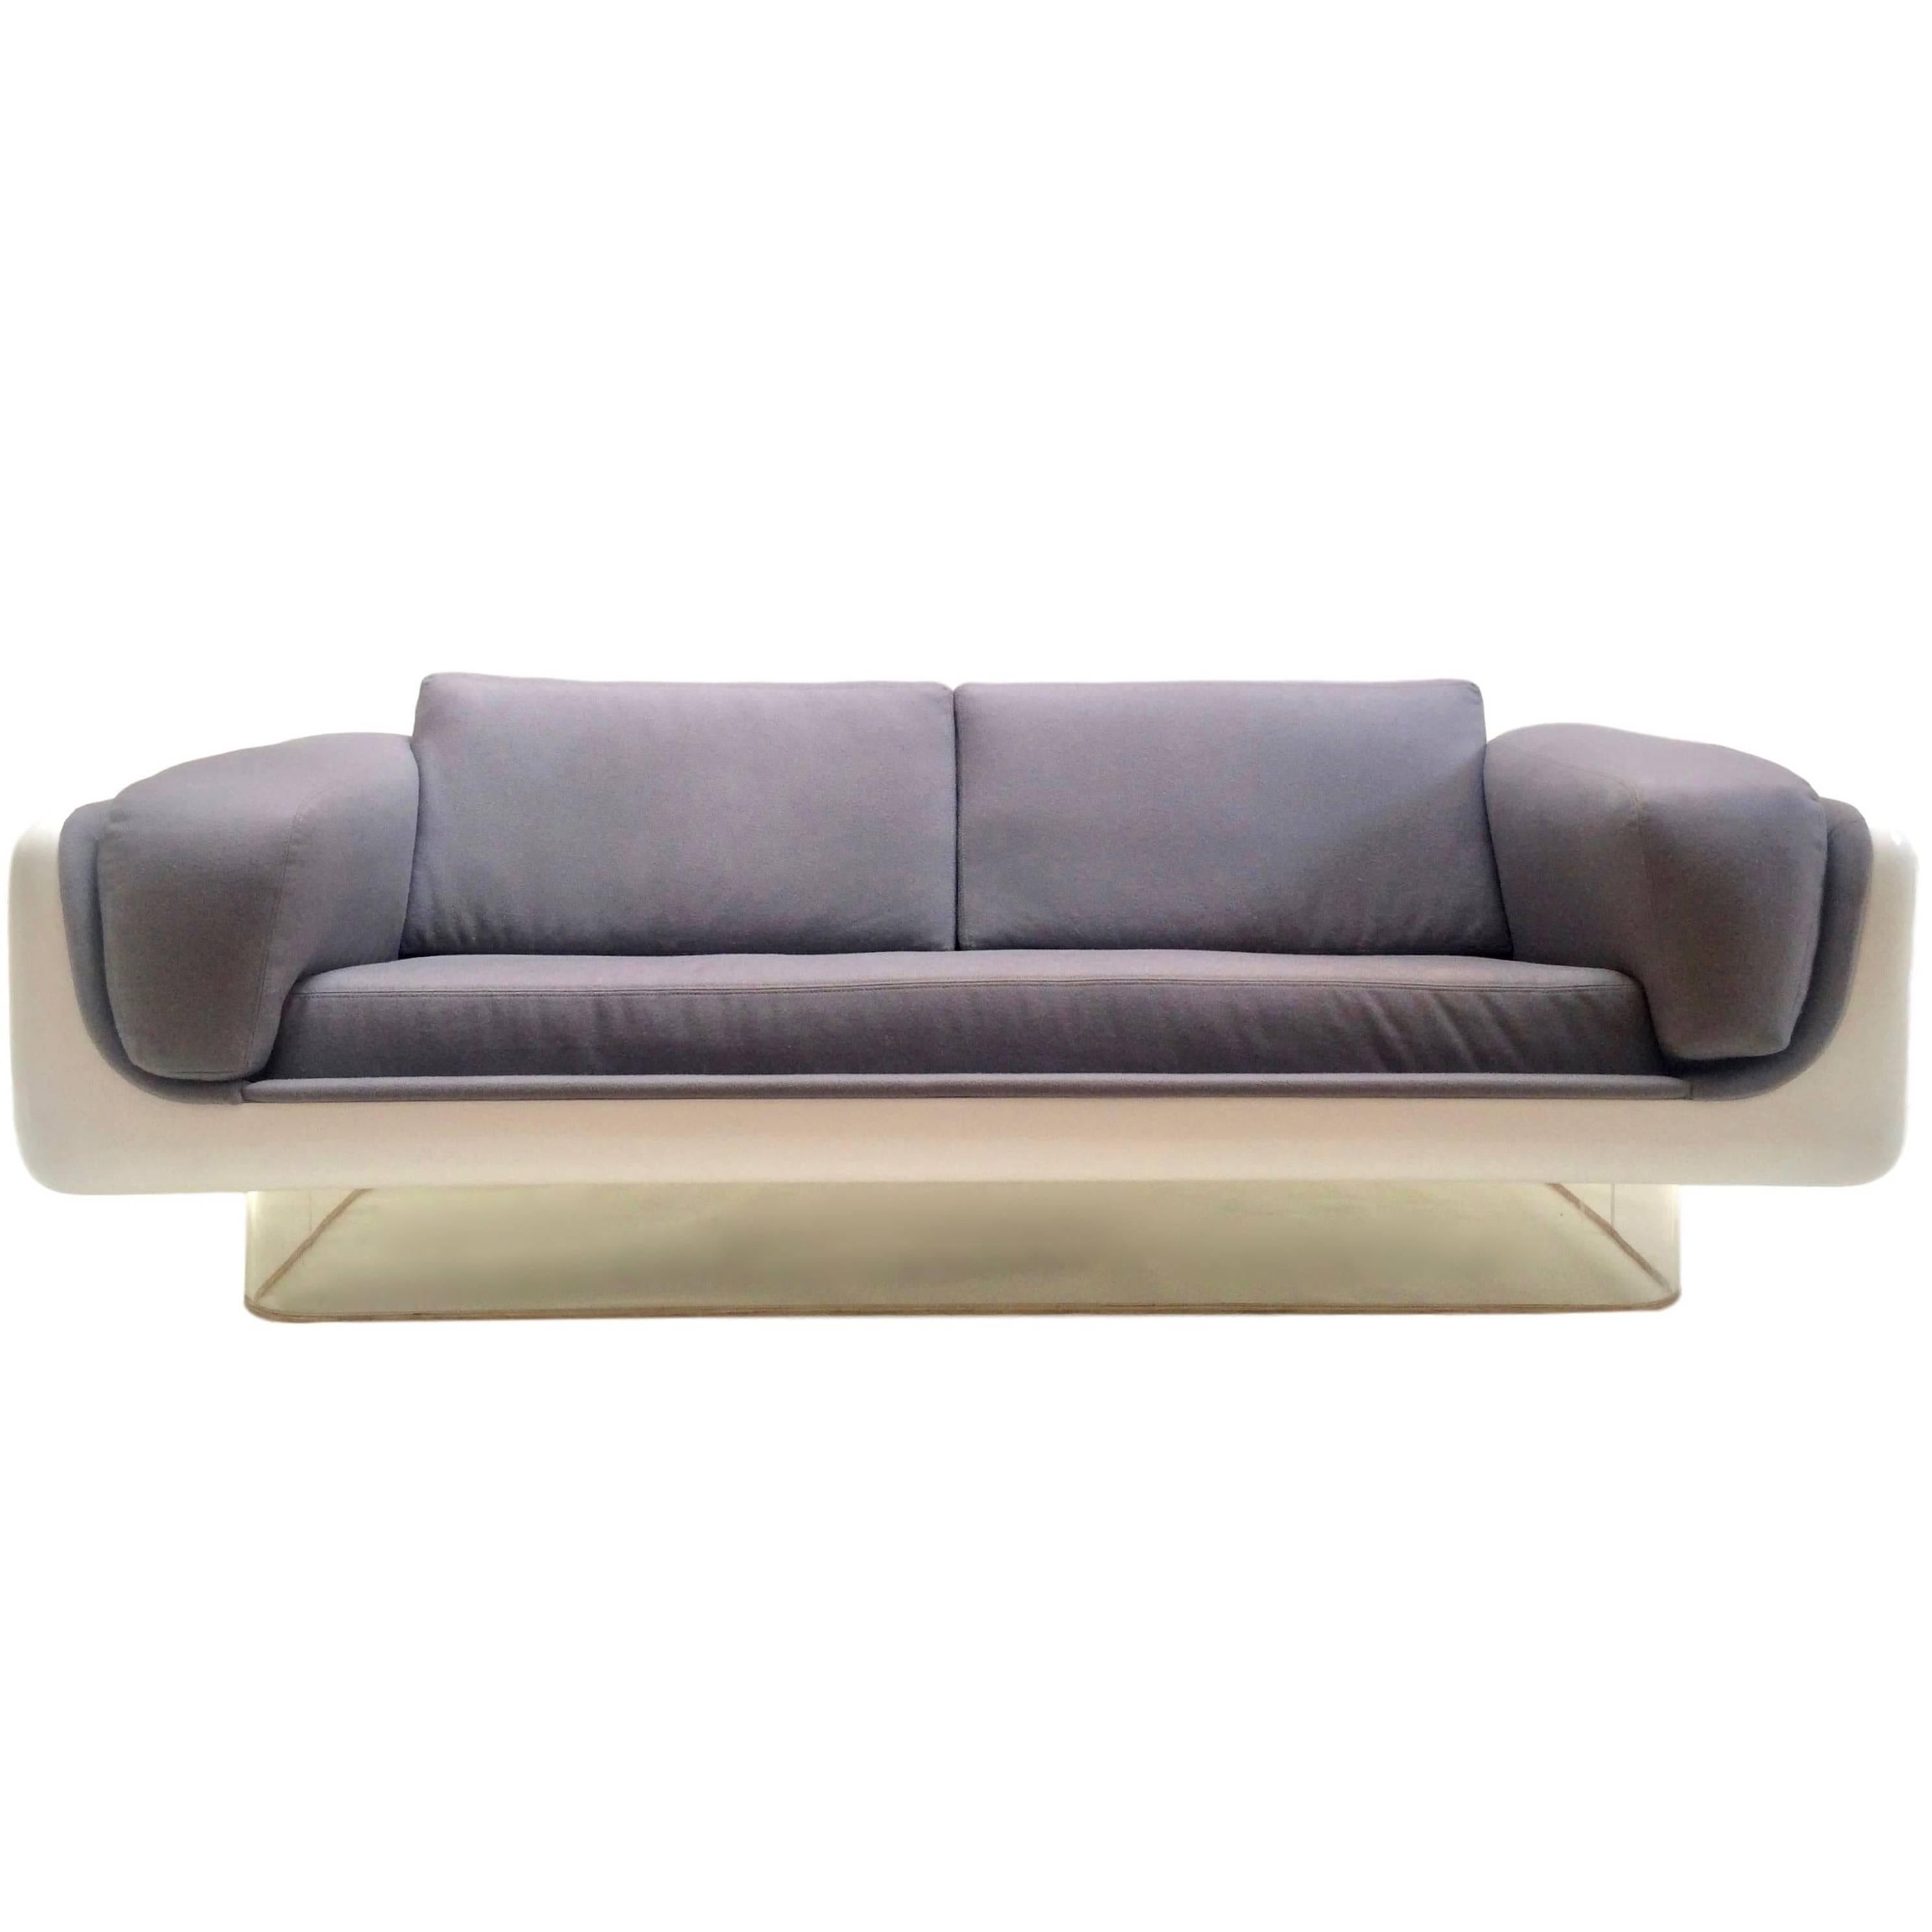 Fiberglass and Lucite Sofa by Steelcase